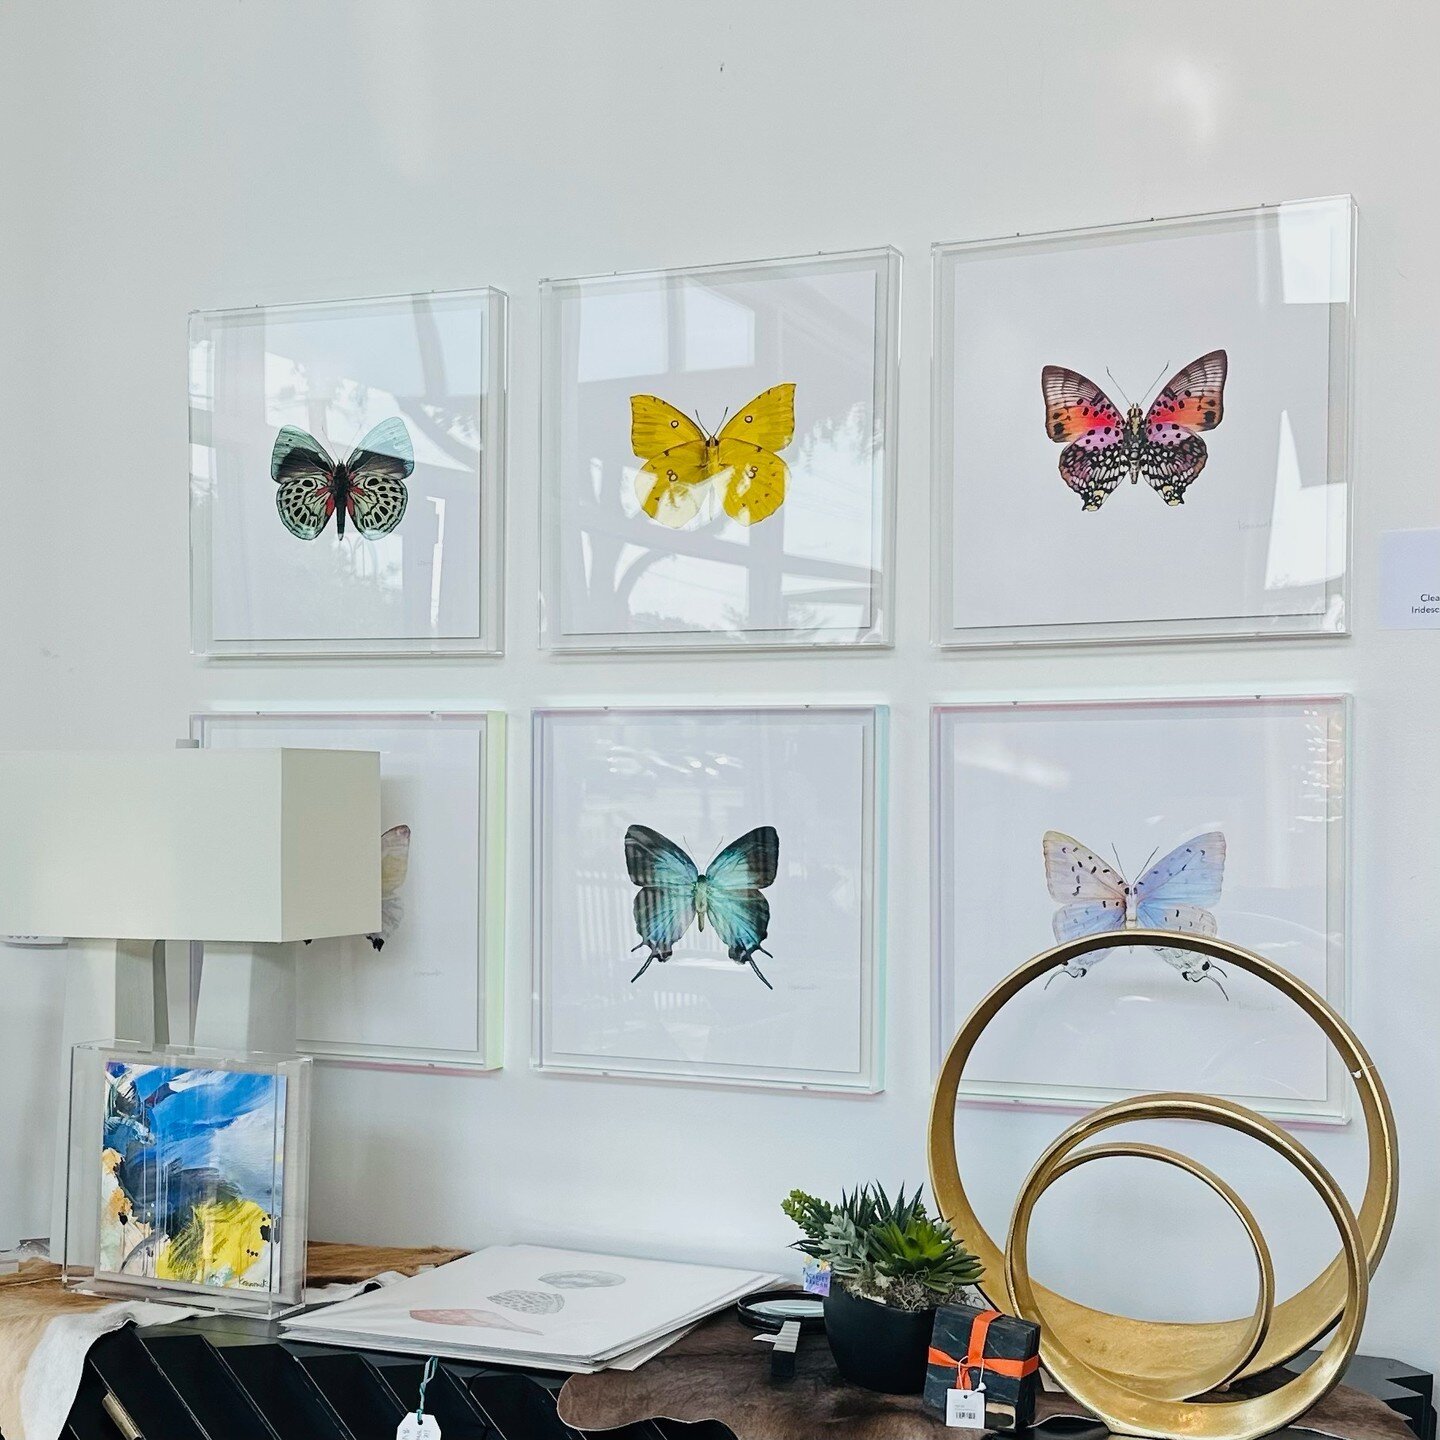 Winged wonders 🦋 These butterfly prints bring such a beautiful touch of nature into any space!! 

#butterflyprints #homedecor #scarletreagan #dallasartist #kristikennimer #shopdallas #shoplocal #shoplocaldallas #kennimersart #scarletreagangallery #s